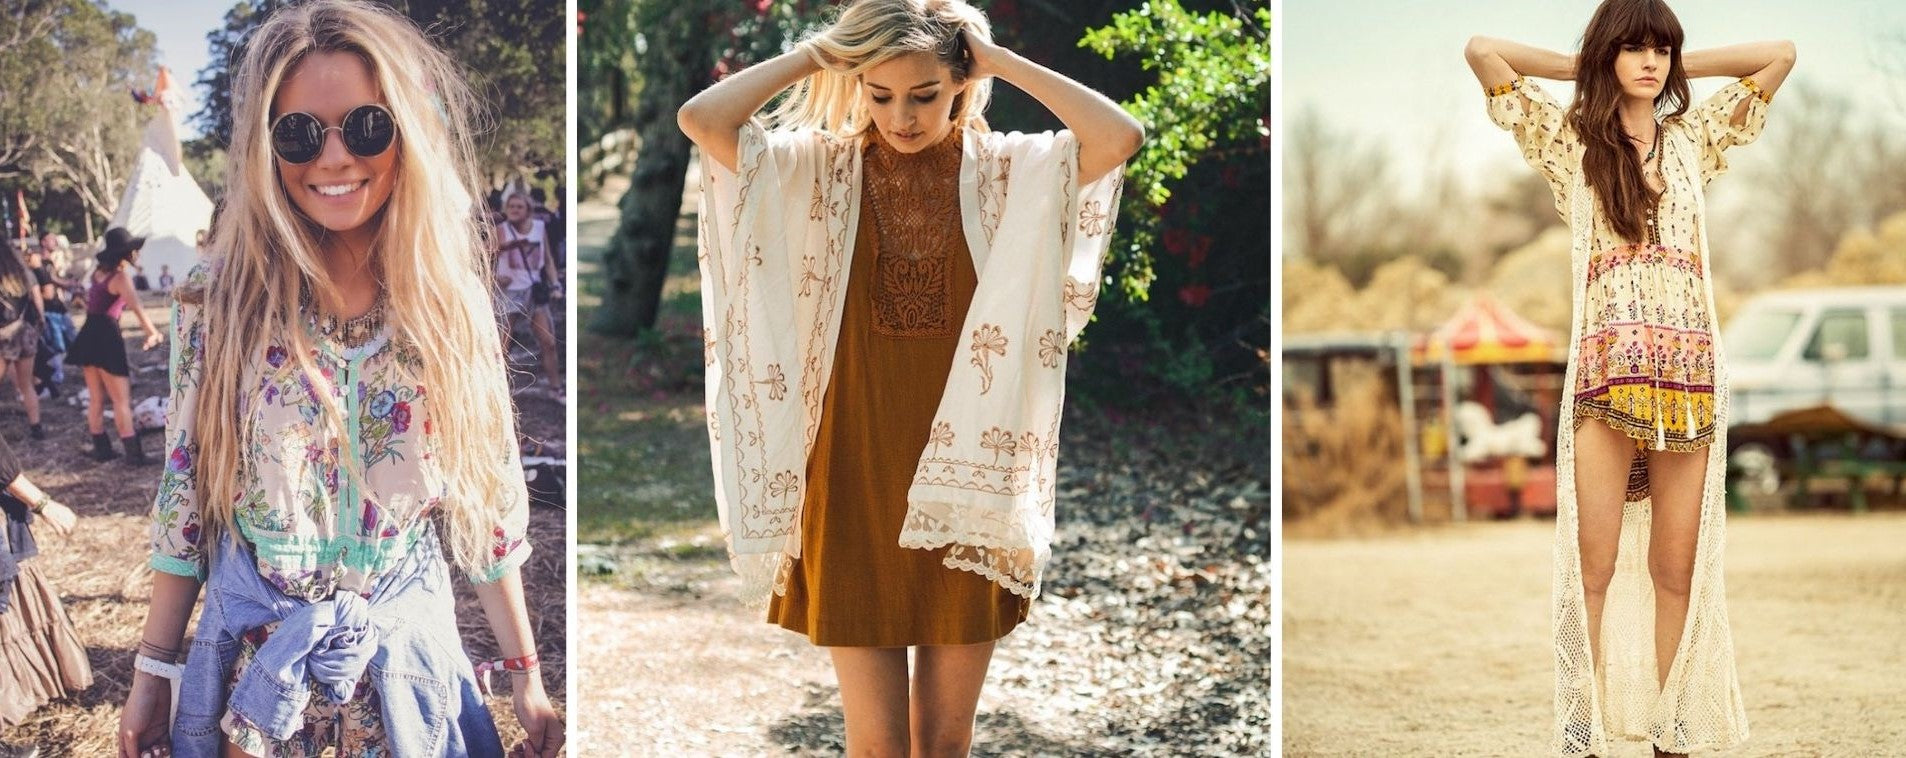 Bohemian Chic-Outfits